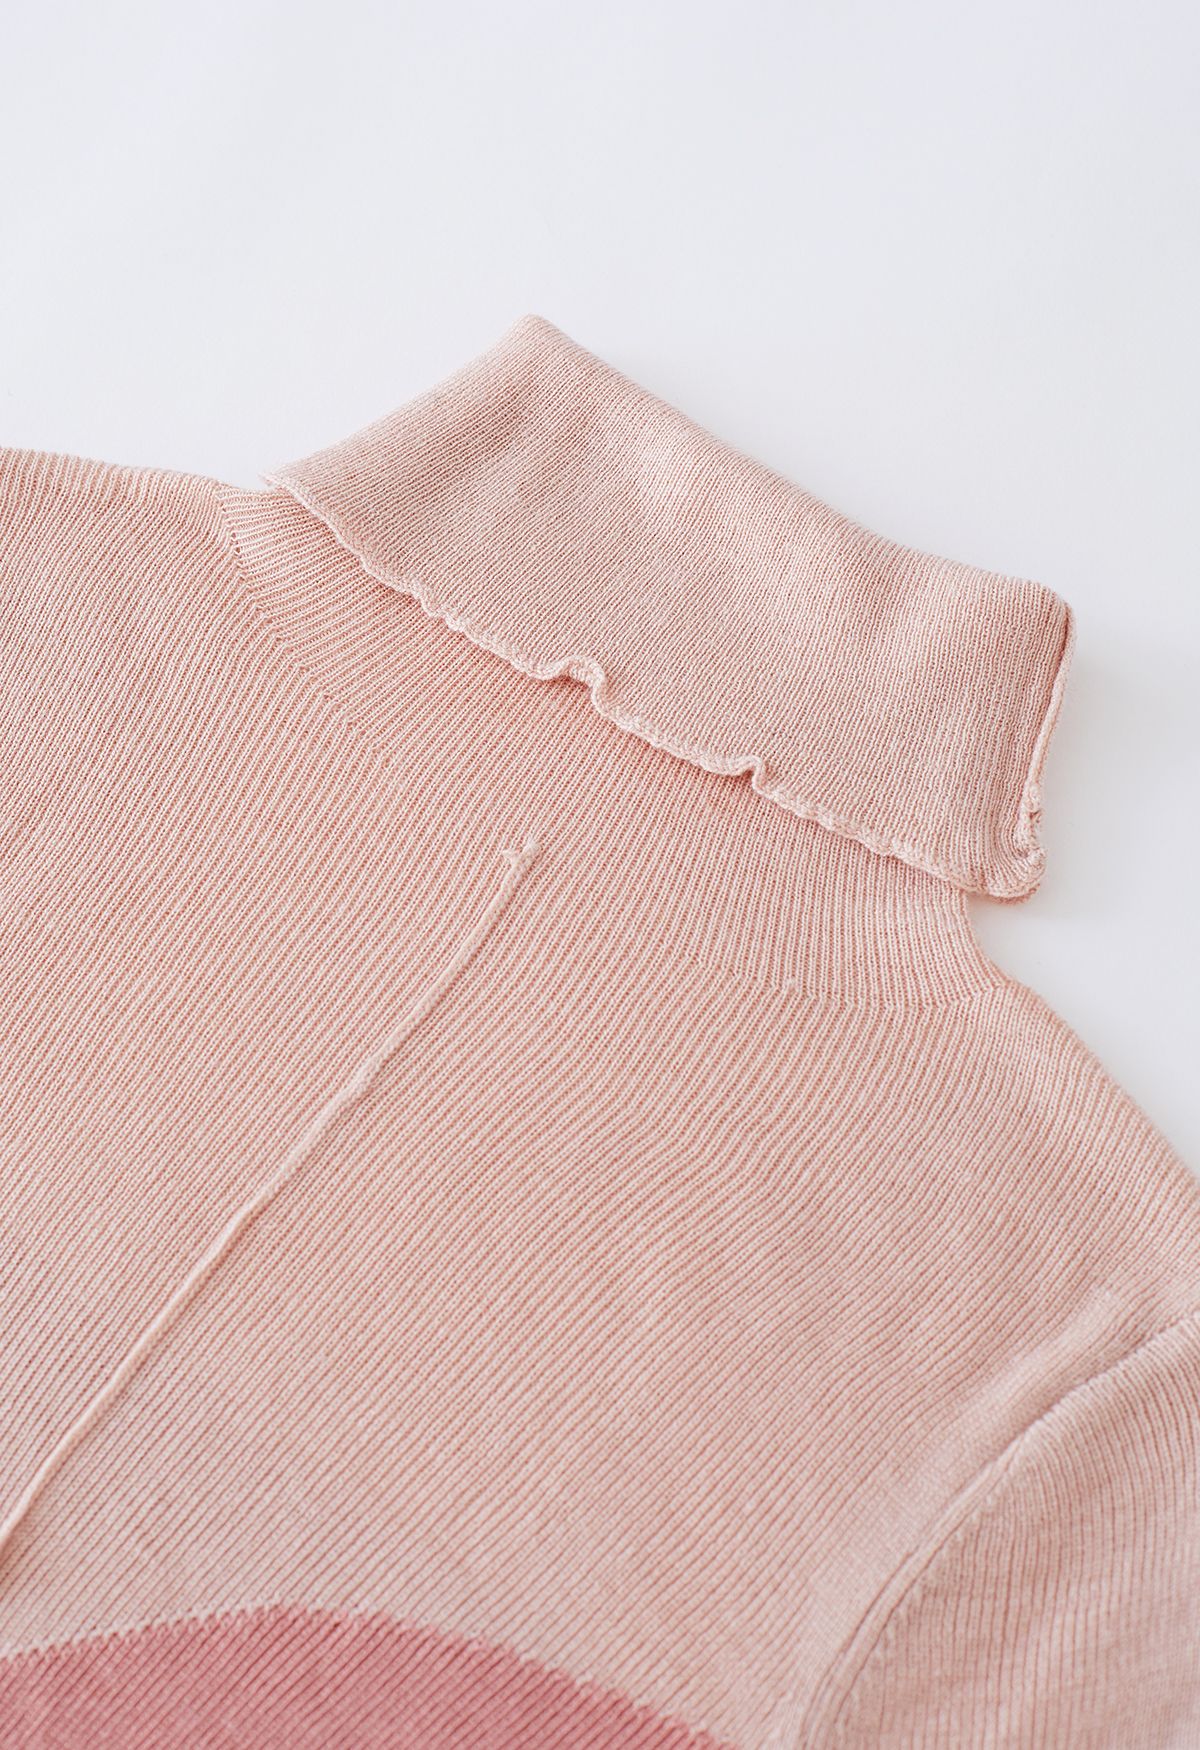 Turtleneck Two-Tone Fitted Knit Top in Pink